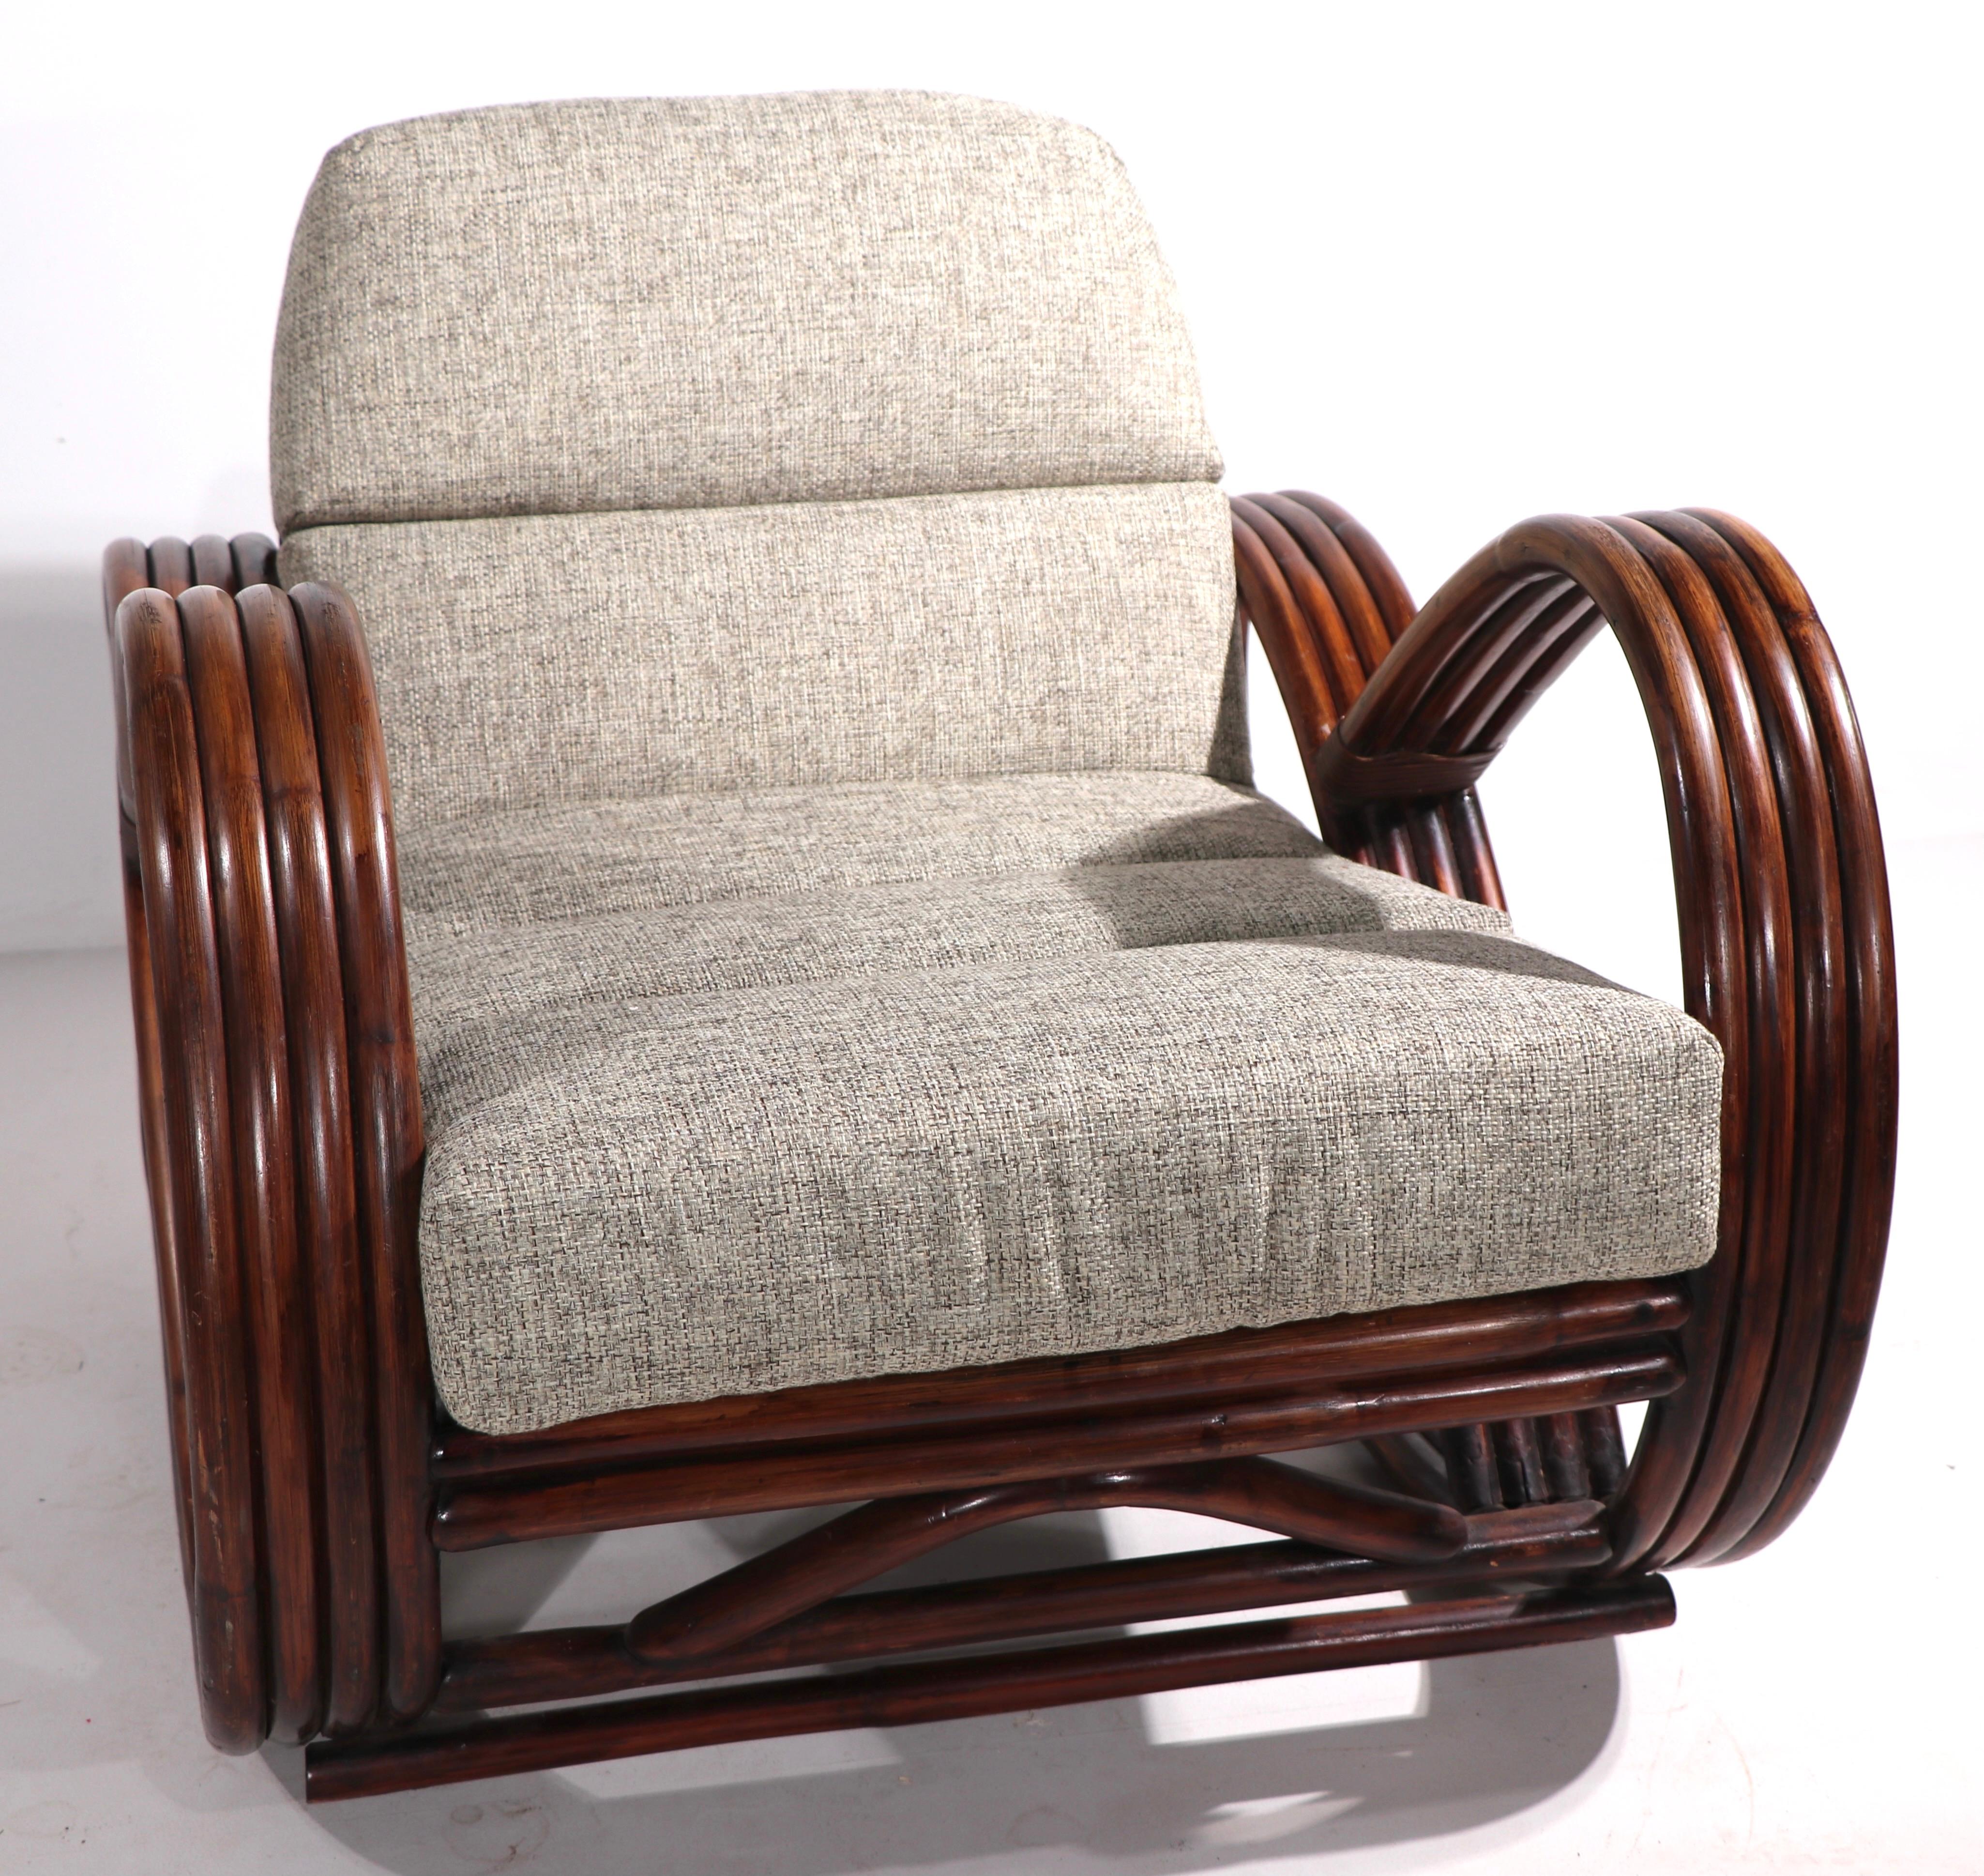 Upholstery Pretzel Bamboo Rocking Chair after Frankl